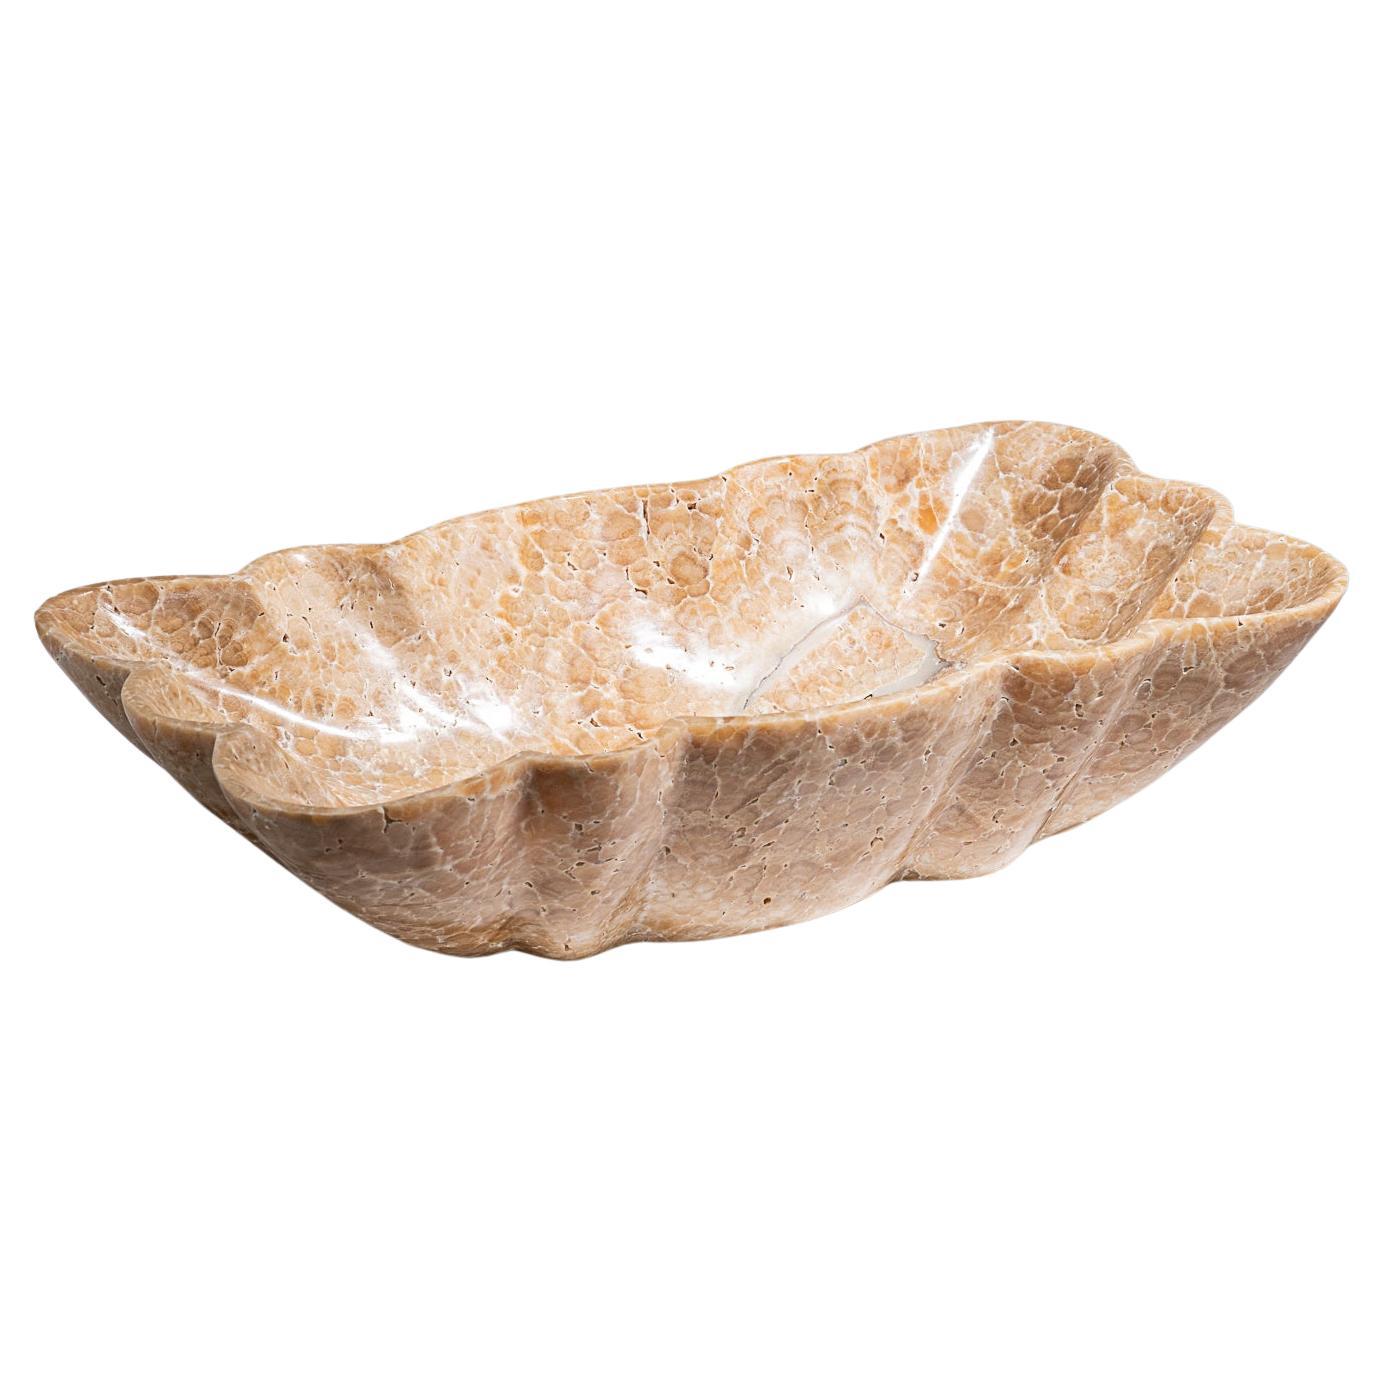 Polished Honey Onyx Bowl from Mexico (9.2 lbs)